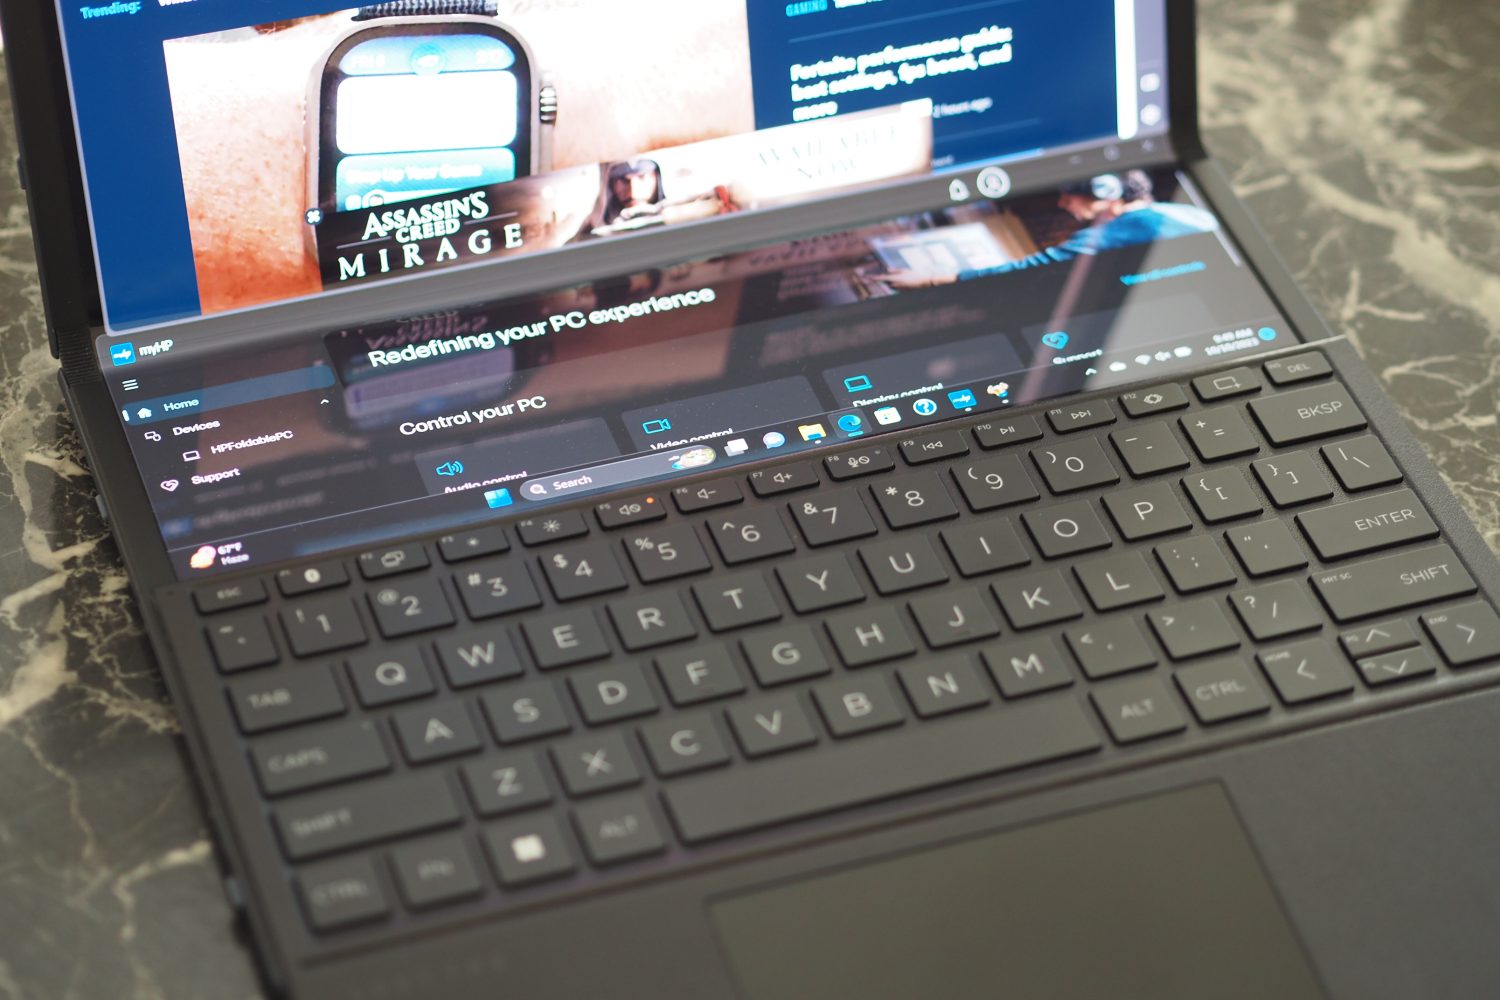 HP Spectre Foldable PC top down view showing keyboard and dual display.